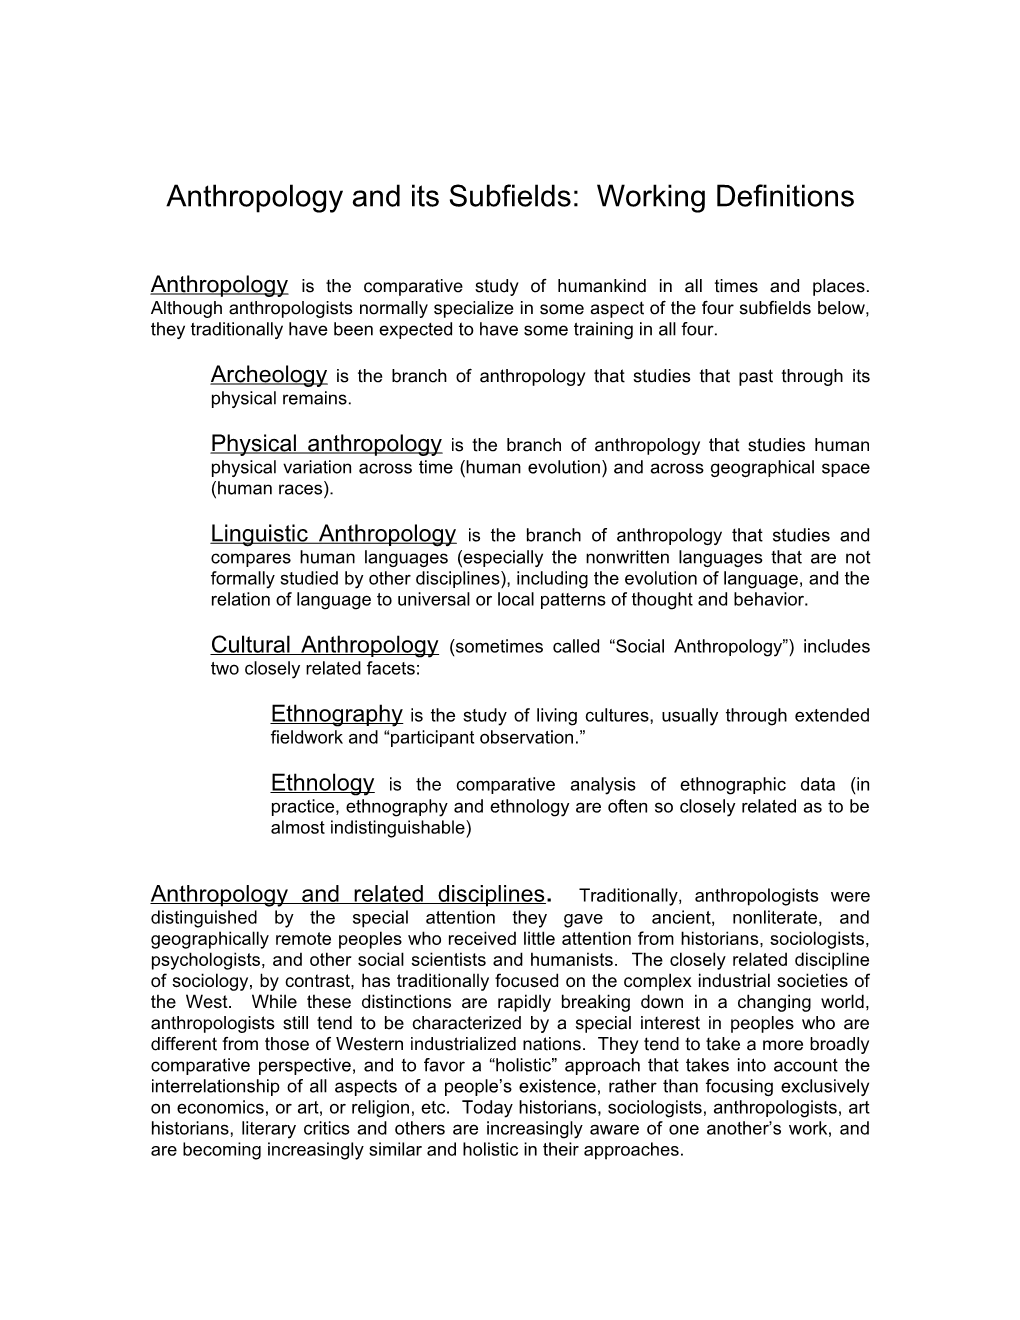 Anthropology and Its Subfields: Working Definitions